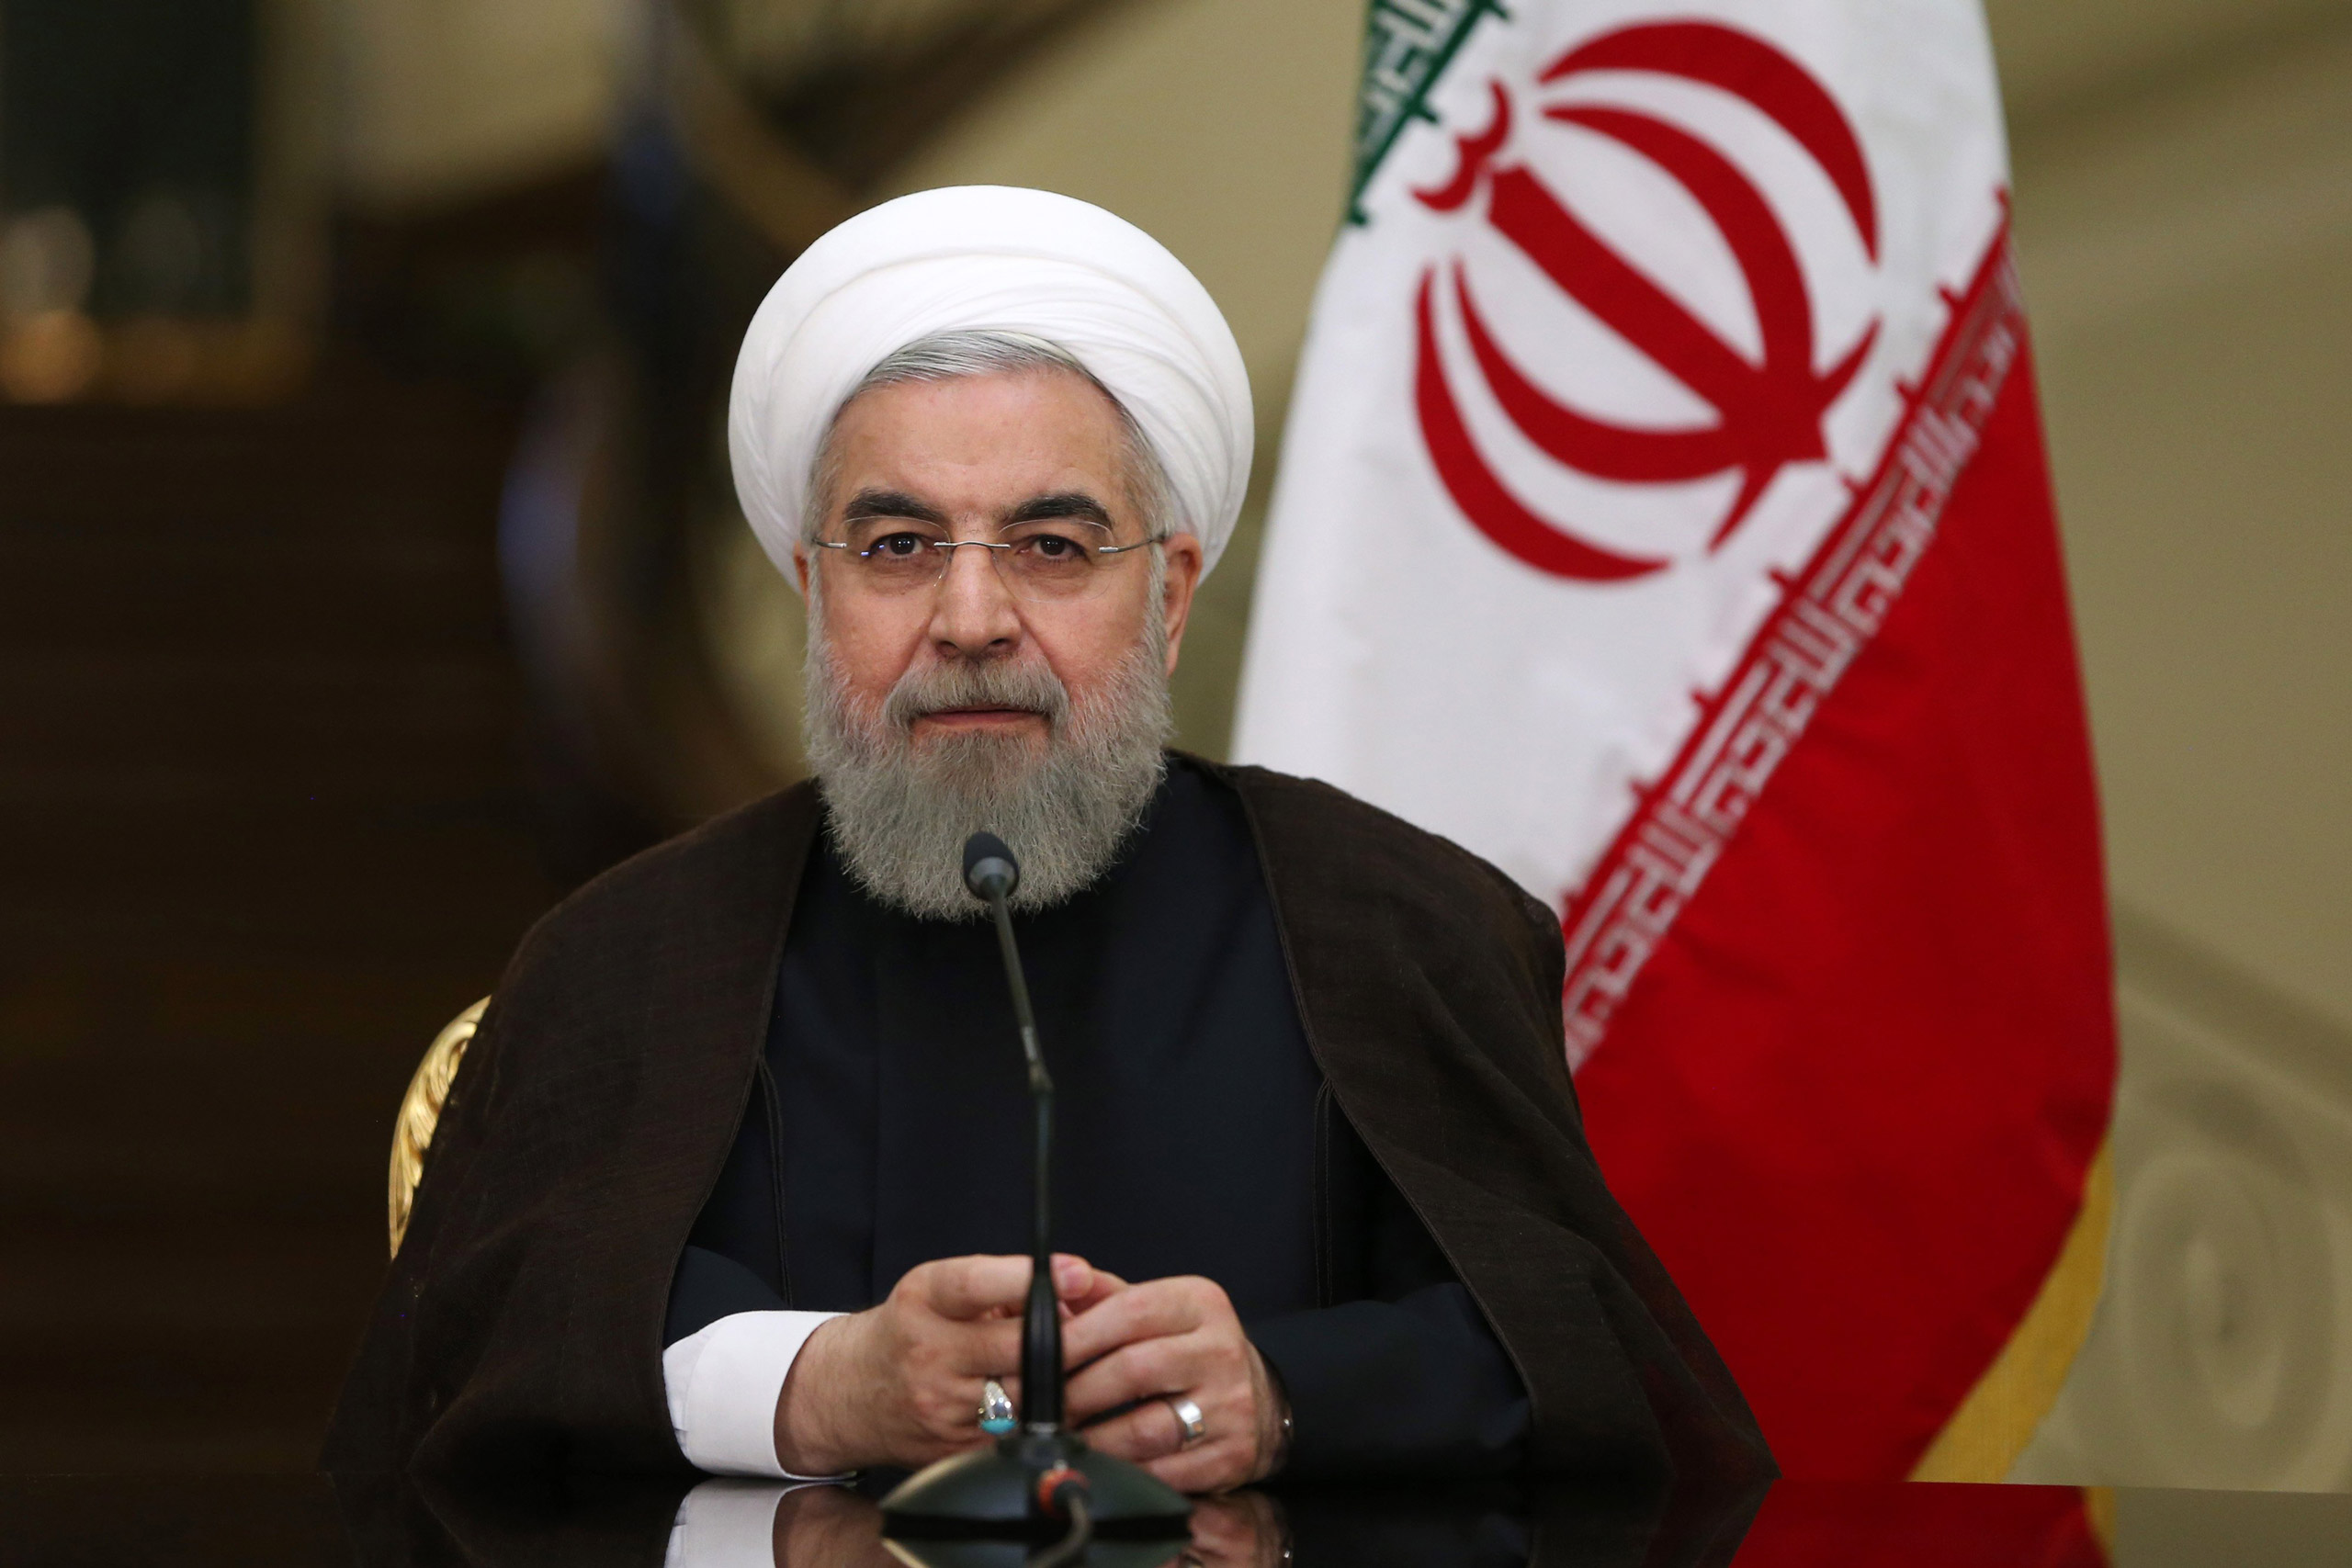 Iranian President Hassan Rouhani speaks with media in a joint press conference with his Austrian counterpart Heinz Fischer after their meeting at the Saadabad Palace in Tehran, Iran, Tuesday, Sept. 8, 2015. Iran's president said on Tuesday that his country is ready to hold talks with the United States and Saudi Arabia on ways to resolve Syria's civil war, providing such negotiations can secure peace and democracy in conflict-torn Syria. (AP Photo/Ebrahim Noroozi)